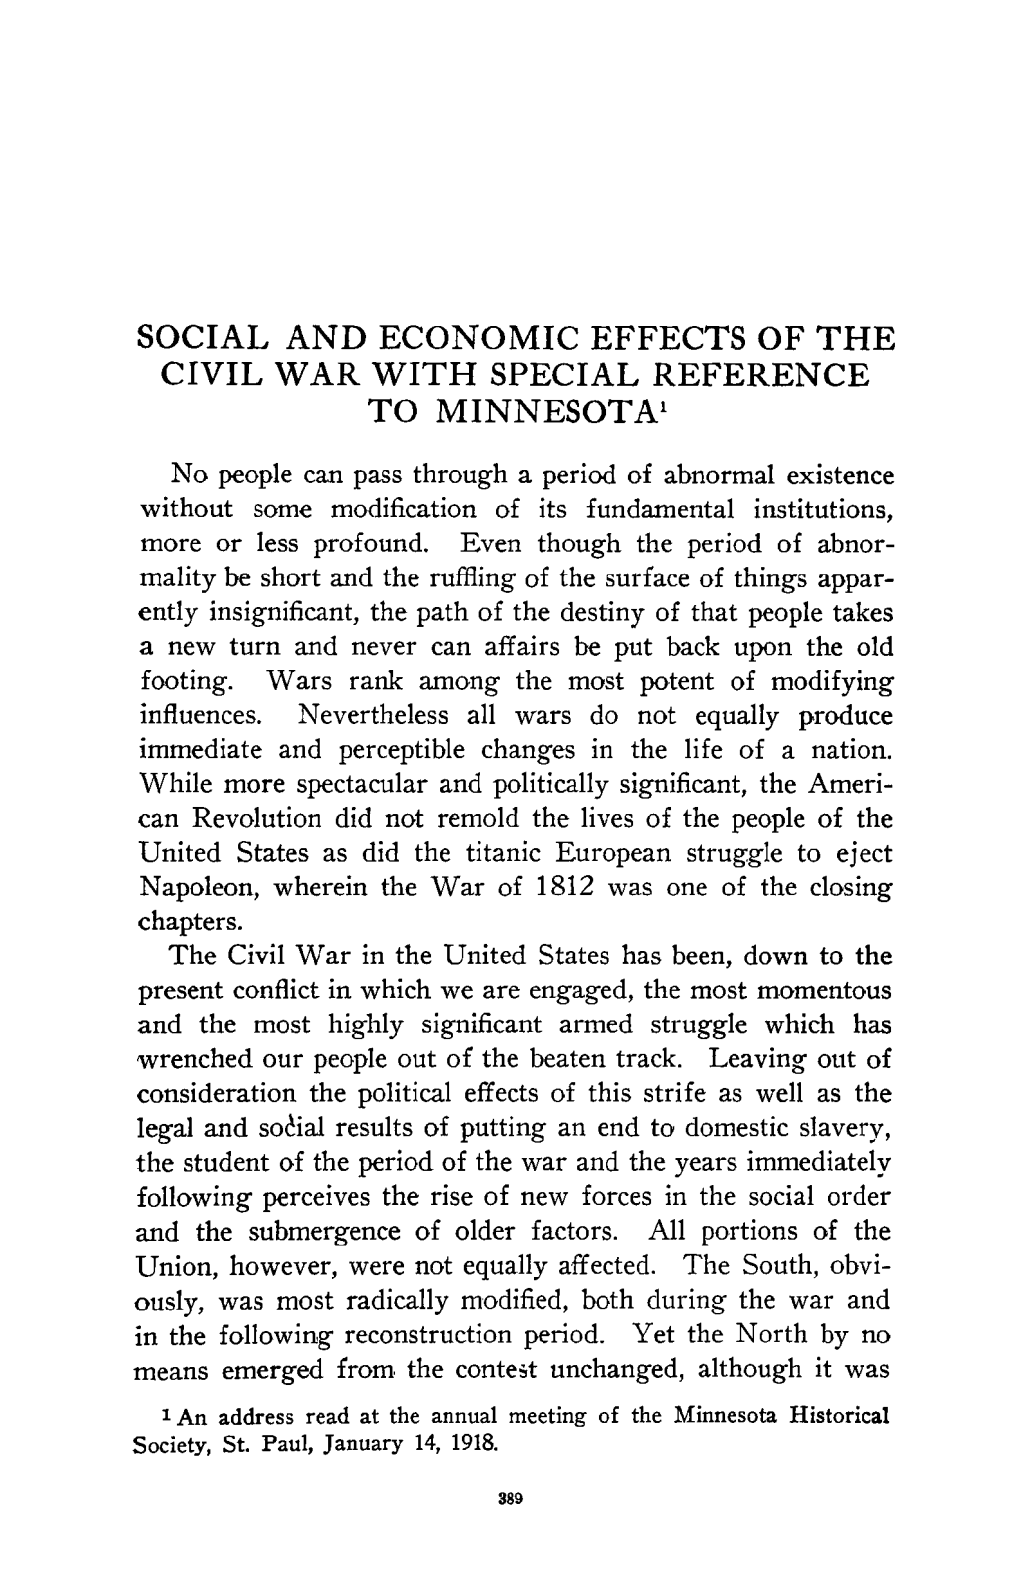 Social and Economic Effects of the Civil War, with Special Reference To